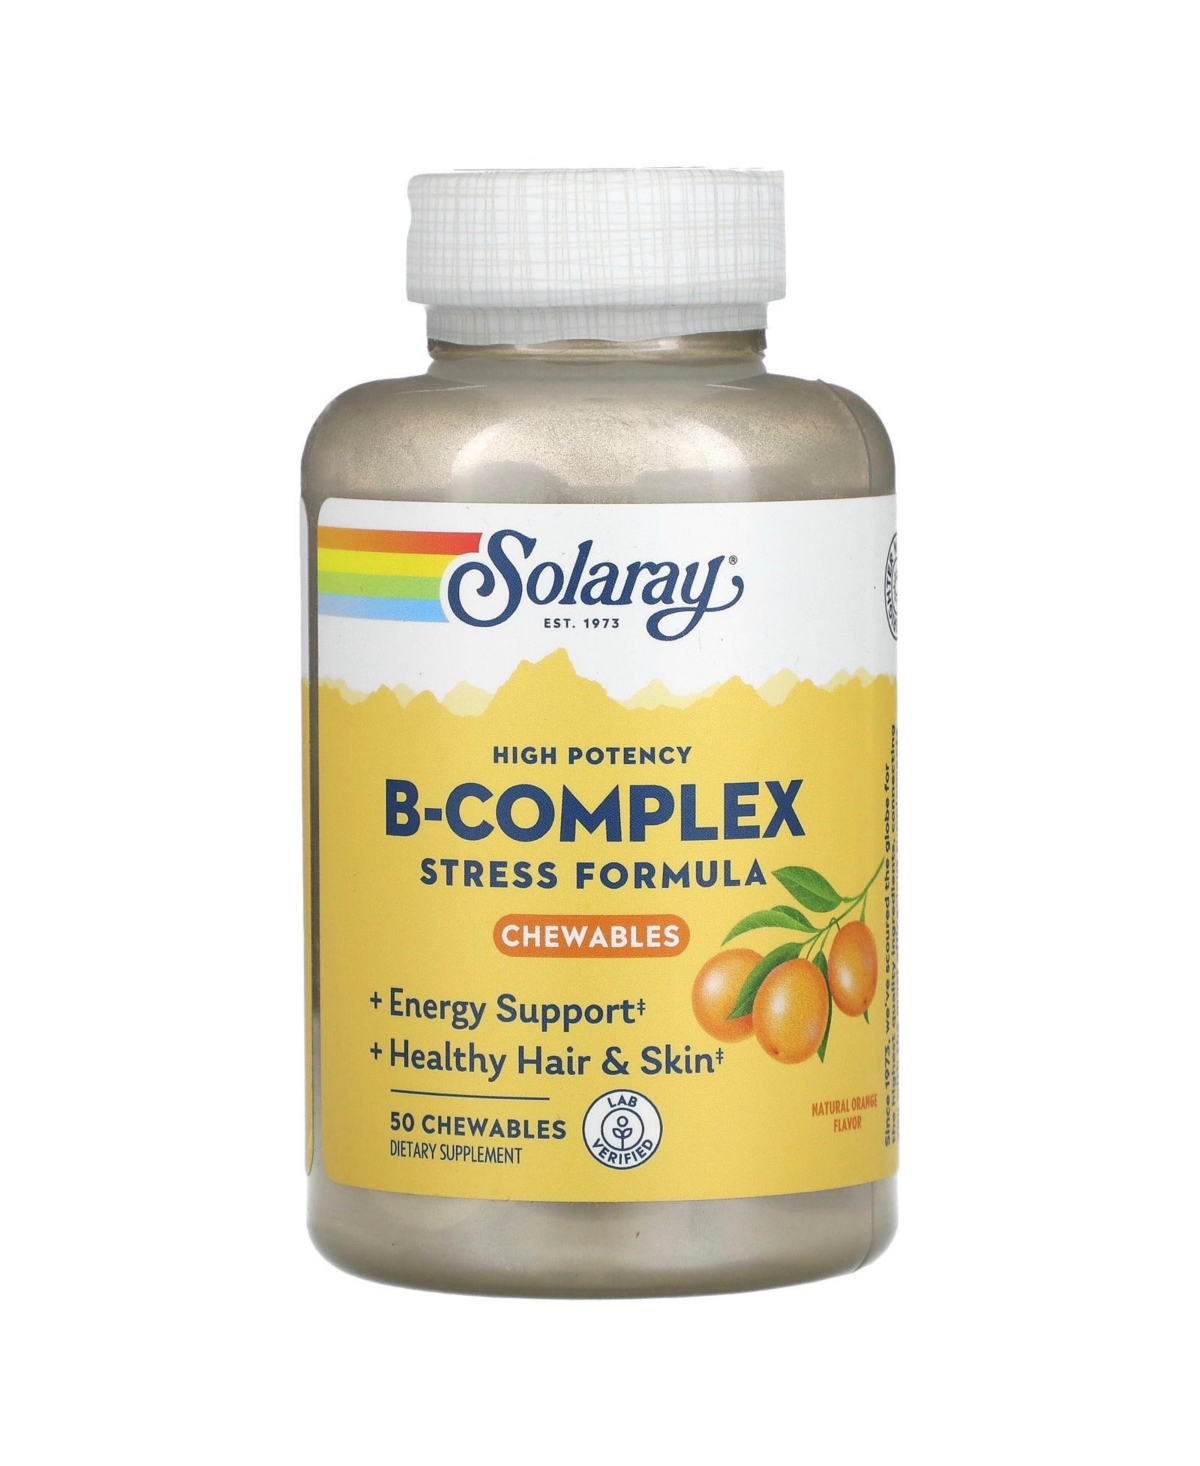 High Potency B-Complex Natural Orange - 50 Chewables - Assorted Pre-pack (See Table